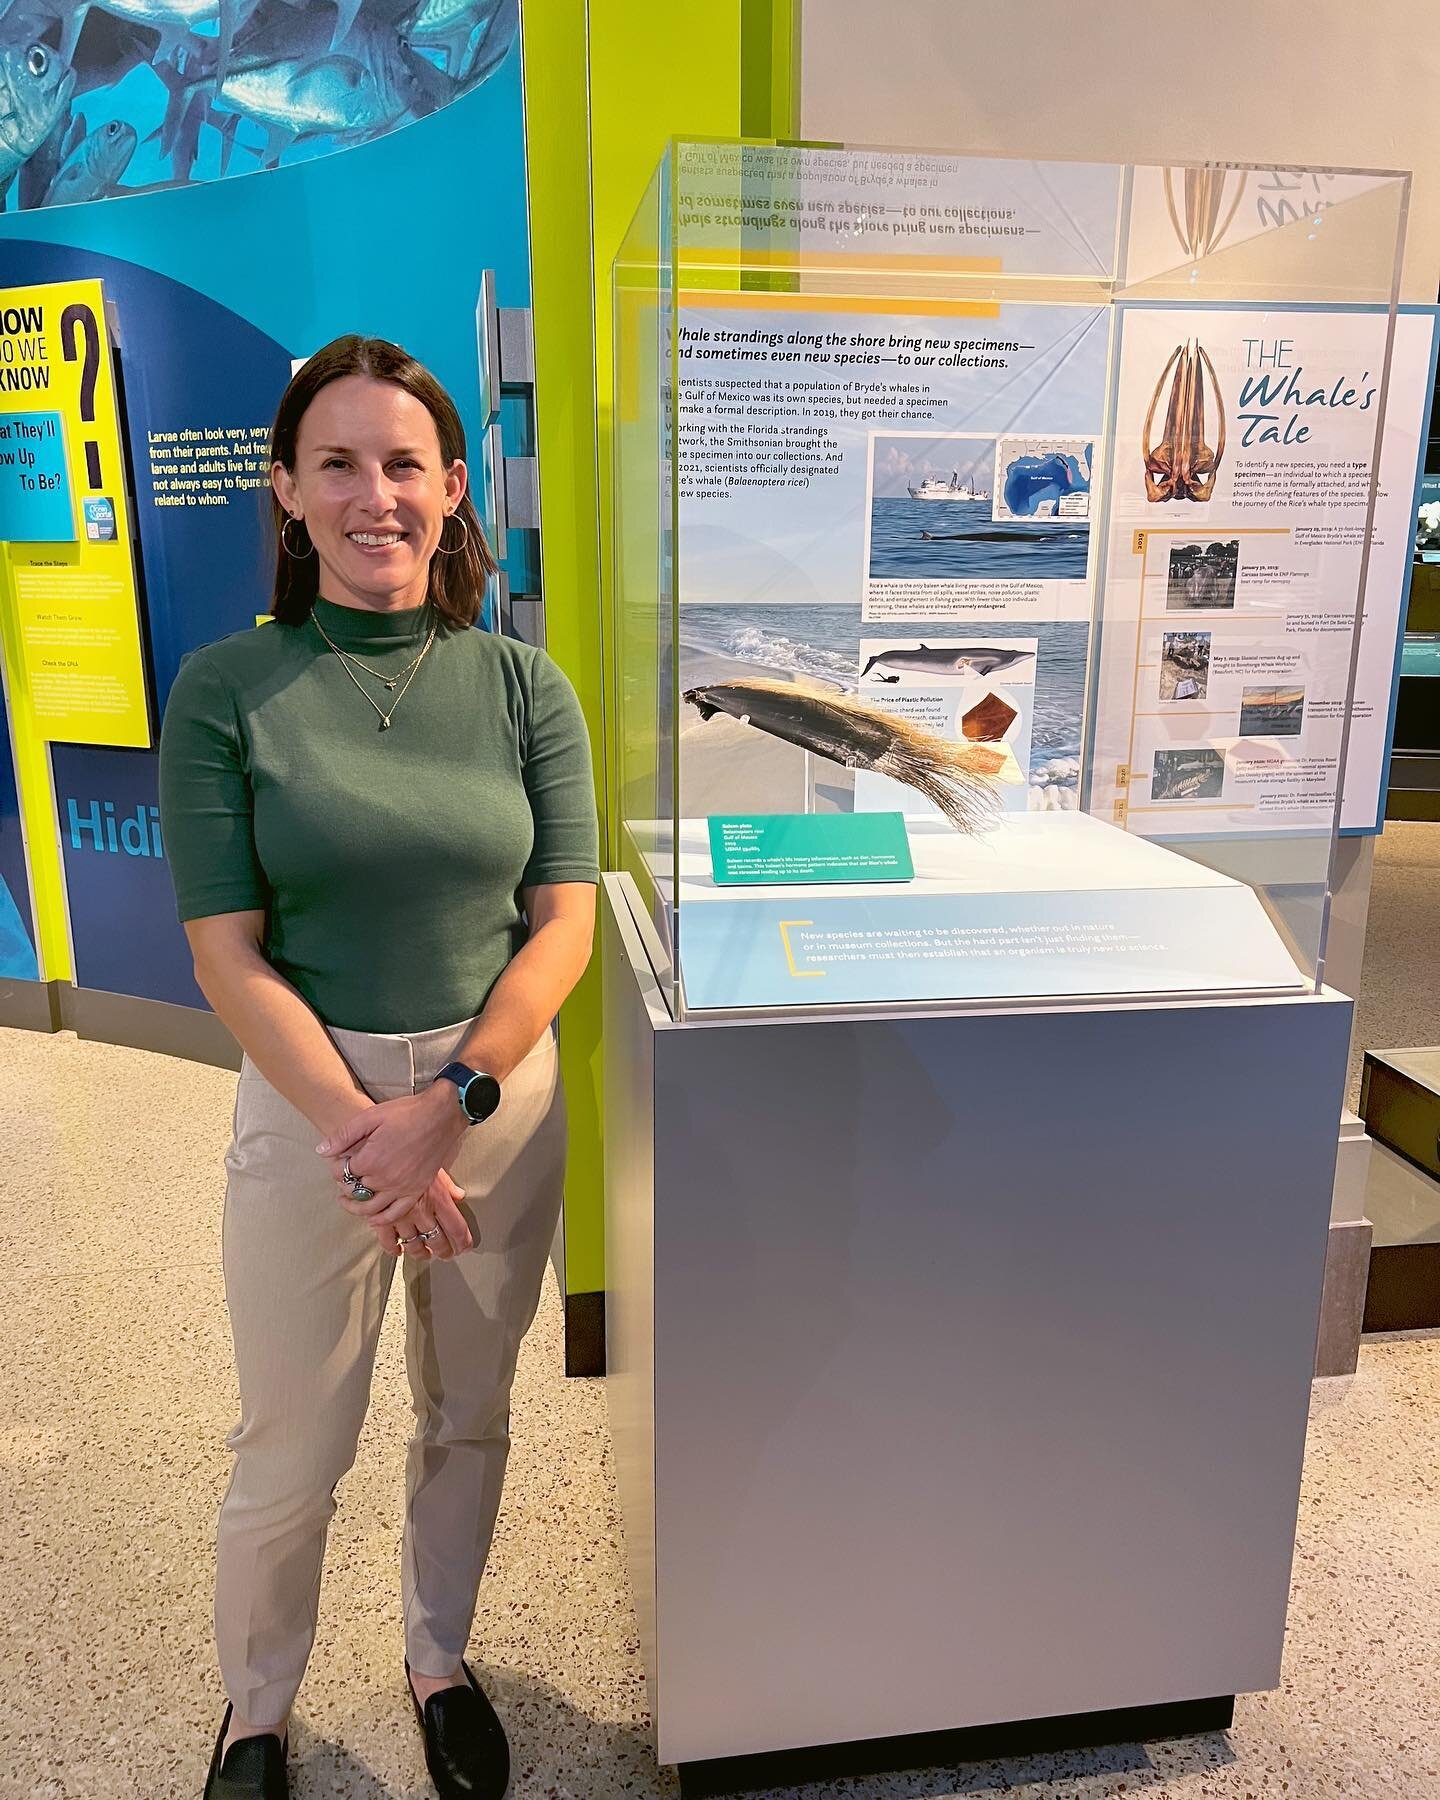 After years of dedicated work by various agencies, there is now a platform to educate people around the world about the story of a 38-foot baleen whale that died from ingesting plastic. In 2019, I created an infographic for FWC SWFL that explained th